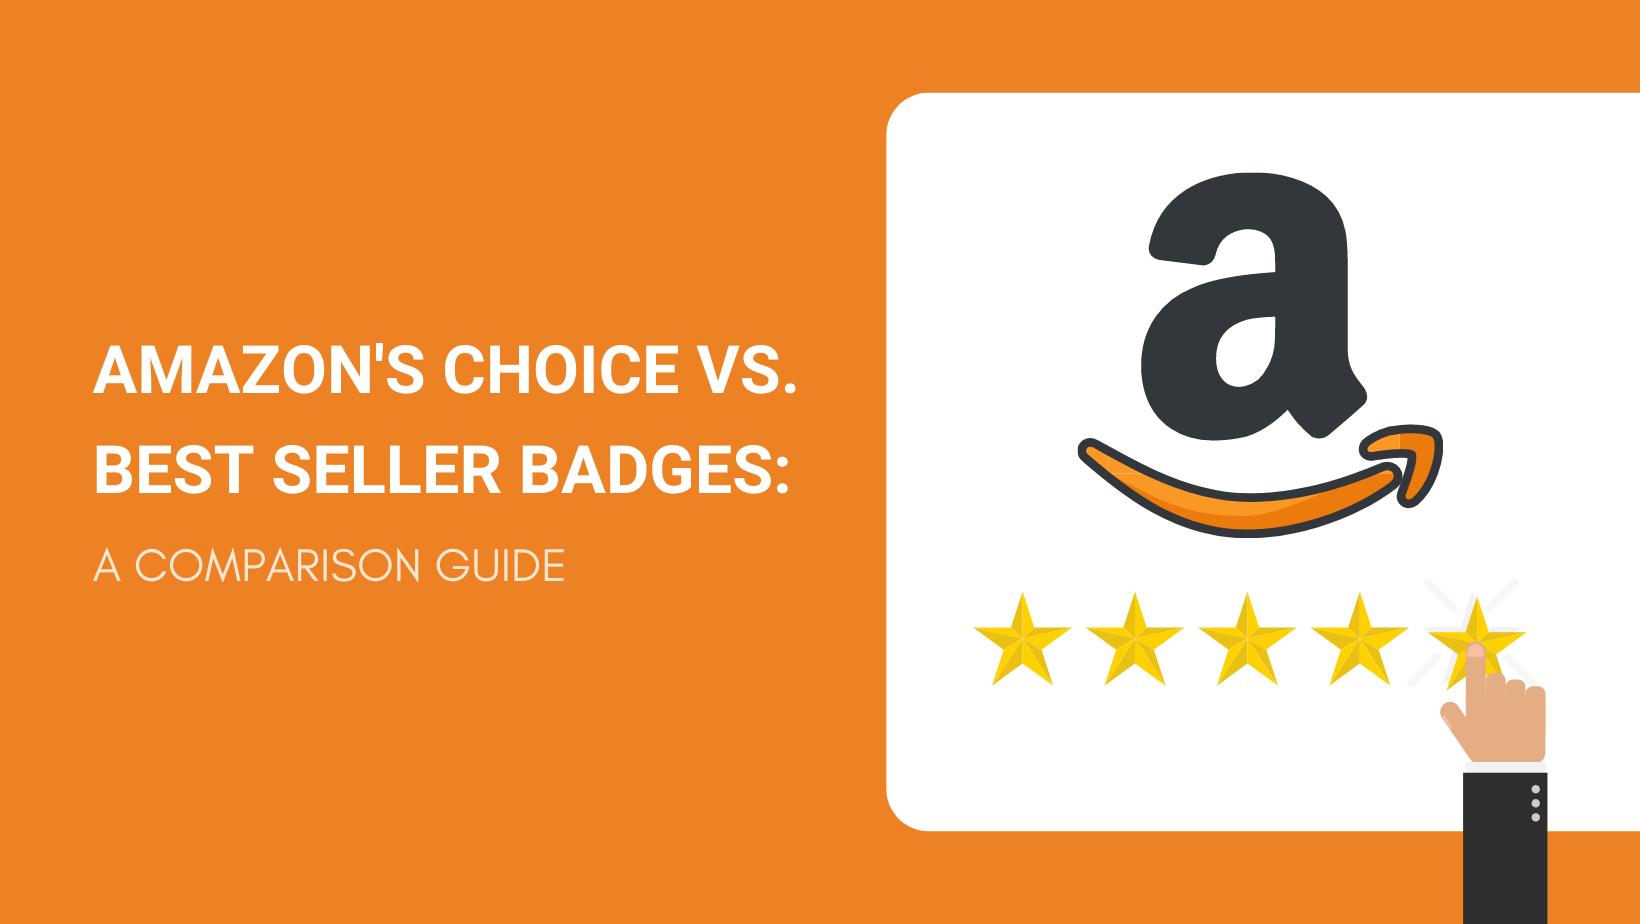 https://cdn.nichedropshipping.com/wp-content/uploads/2022/07/AMAZONS-CHOICE-VS.-BEST-SELLER-BADGES-A-COMPARISON-GUIDE.png